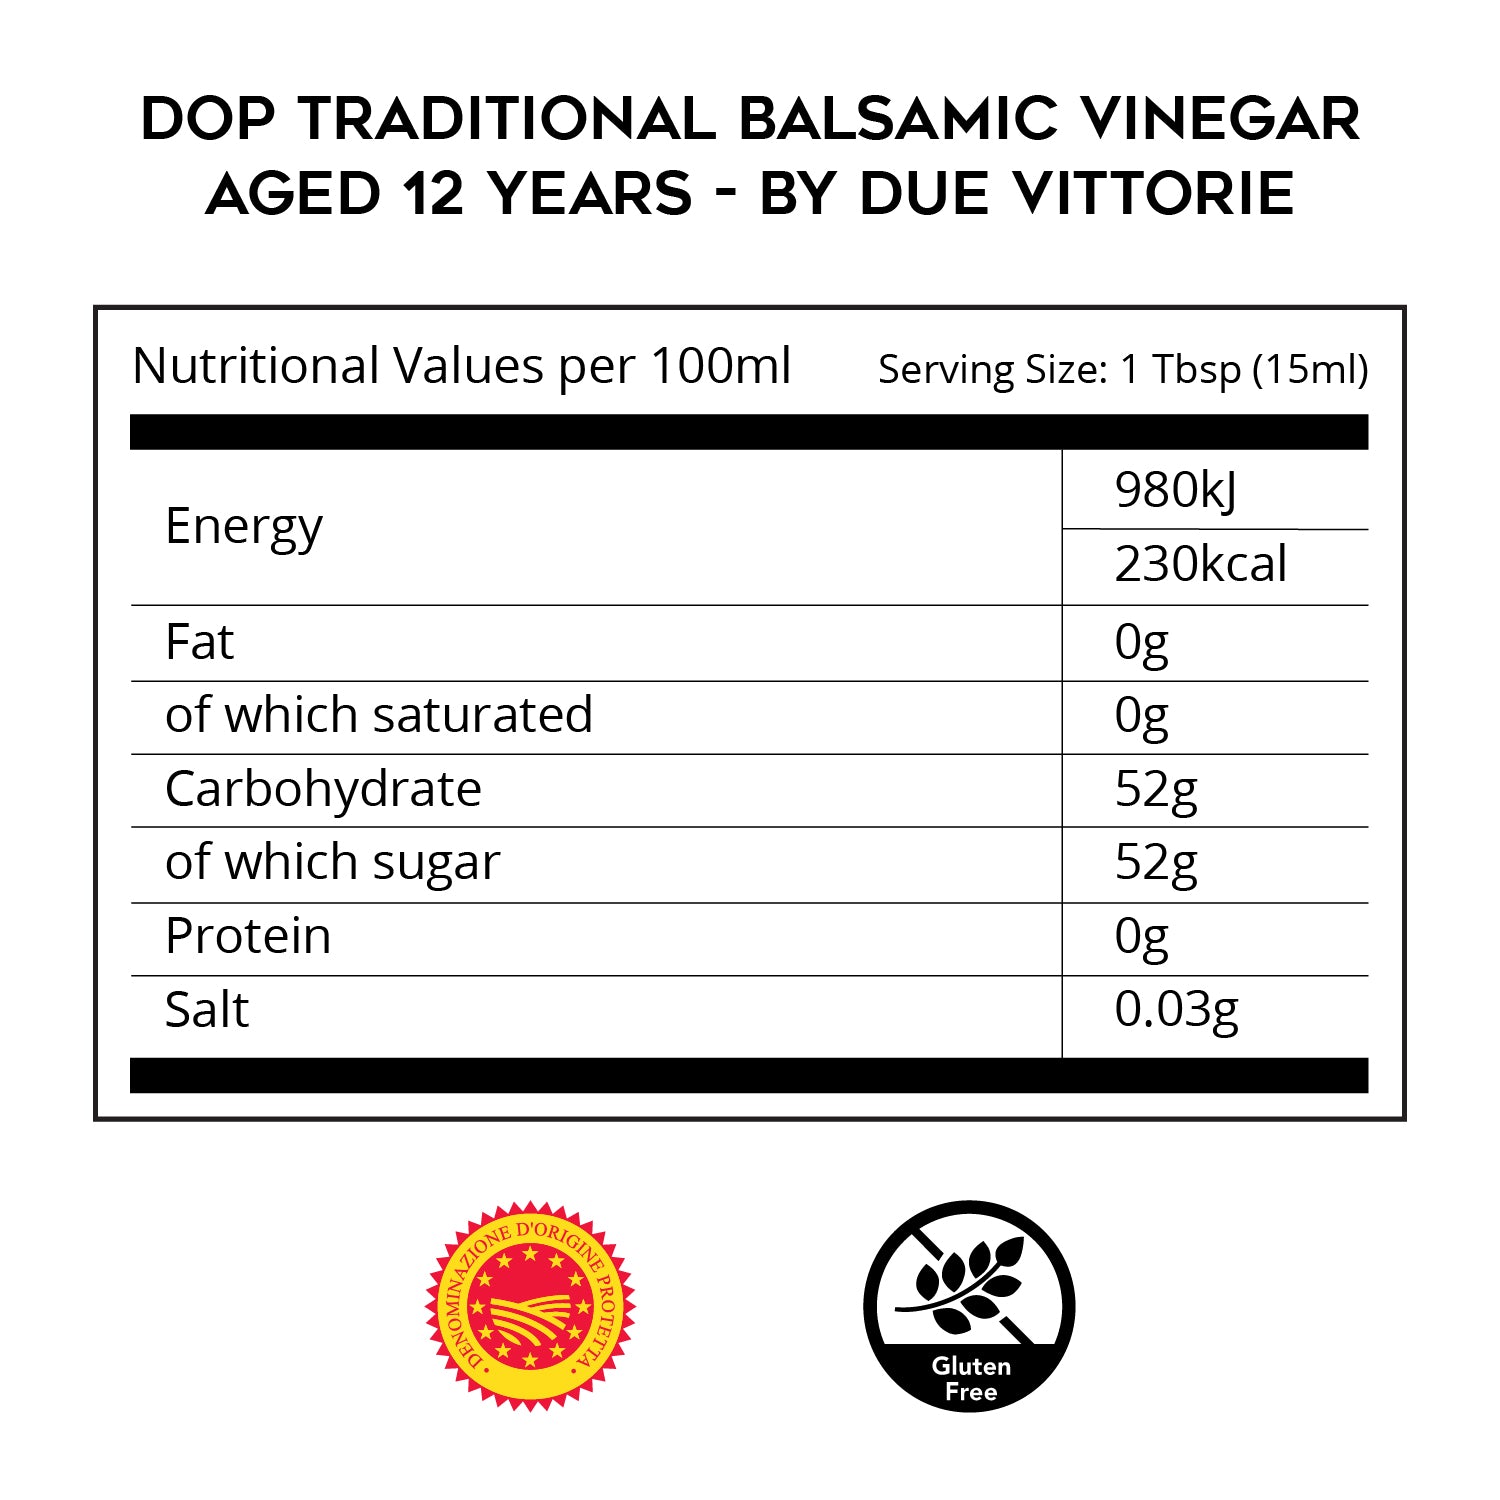 DOP Traditional Balsamic Vinegar - Aged 12 Years - by Due Vittorie